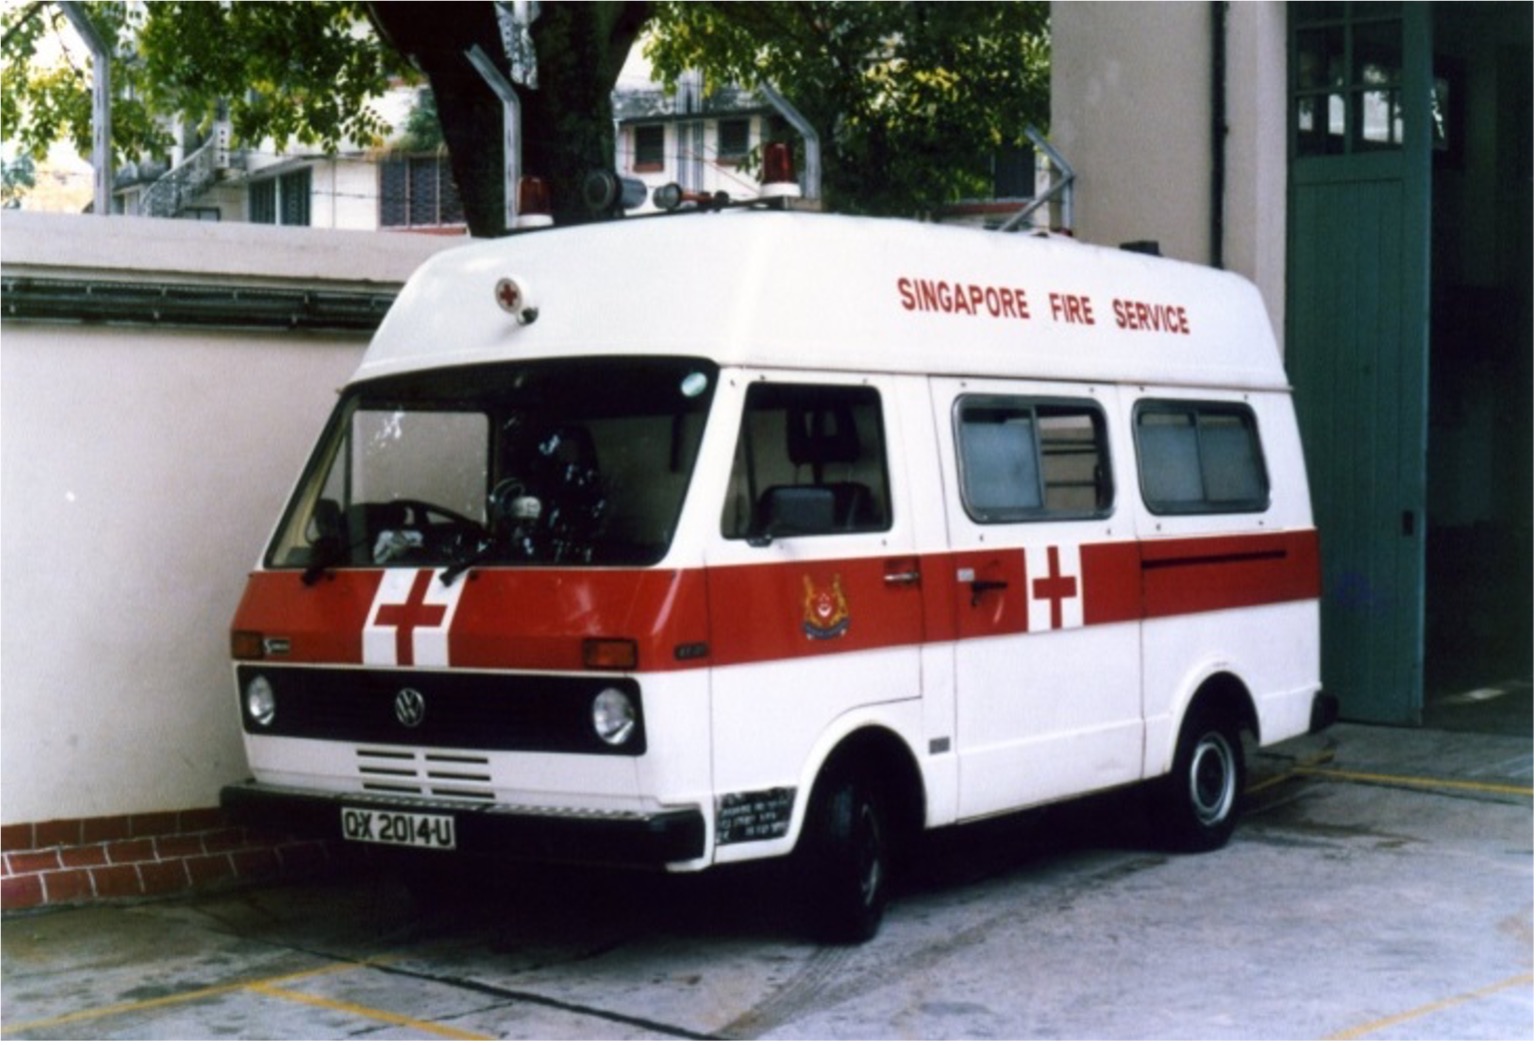 Volkswagen LT31 (1984) was one of the models for the second-generation ambulances.